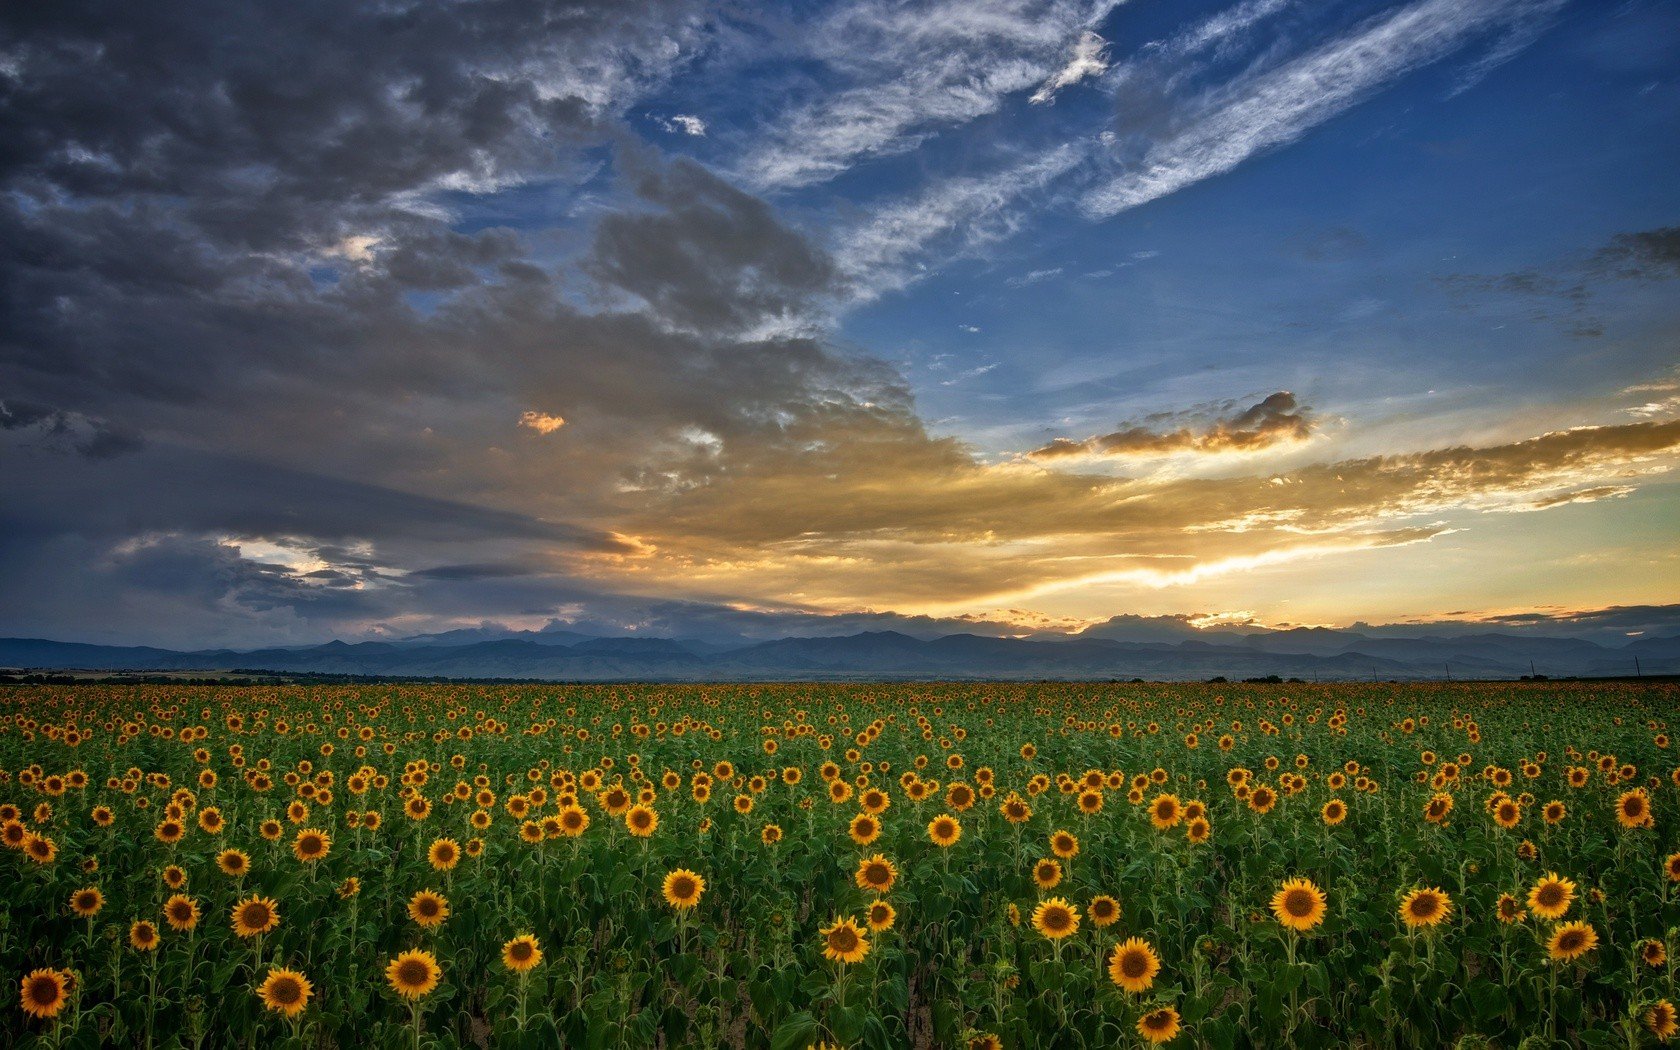 clouds, Landscapes, Nature, Skylines, Sunflowers Wallpaper